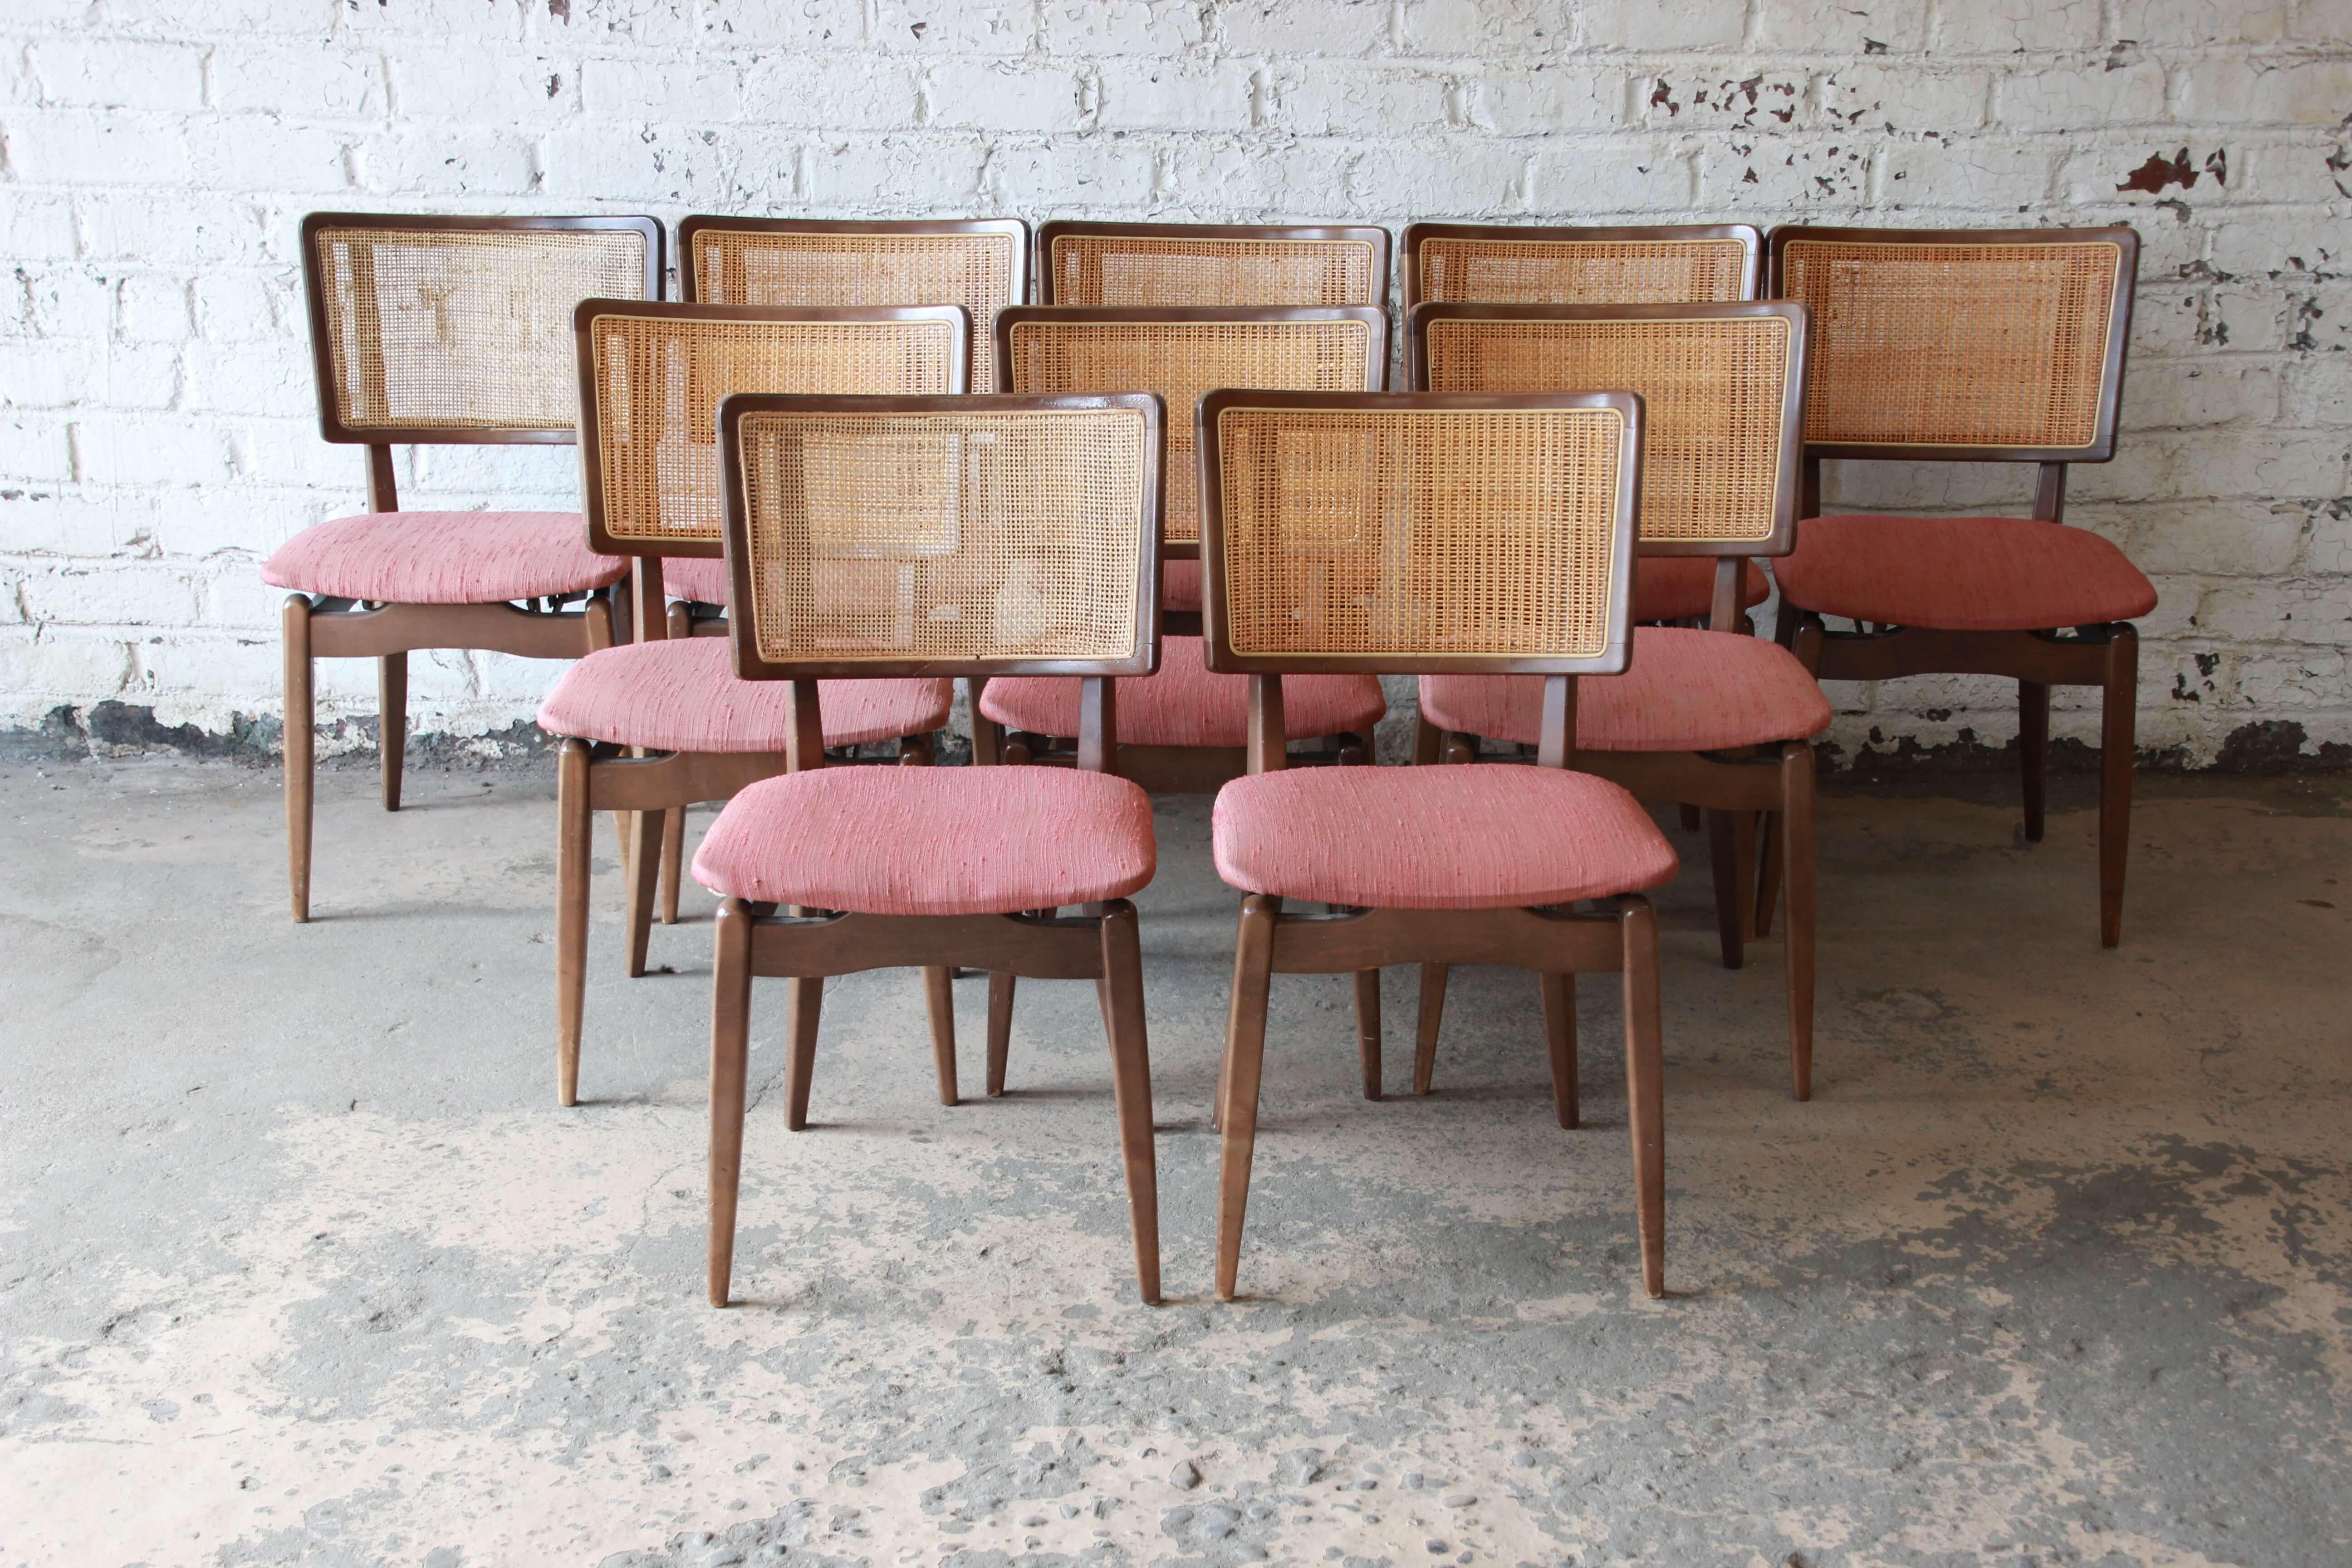 Offering a very unique set of ten Stakmore folding dining chairs. The chairs have a nice mid-century modern design with a George Nelson style back. The chairs do fold up to allow for easy transport or storage, a very unique feature while being very